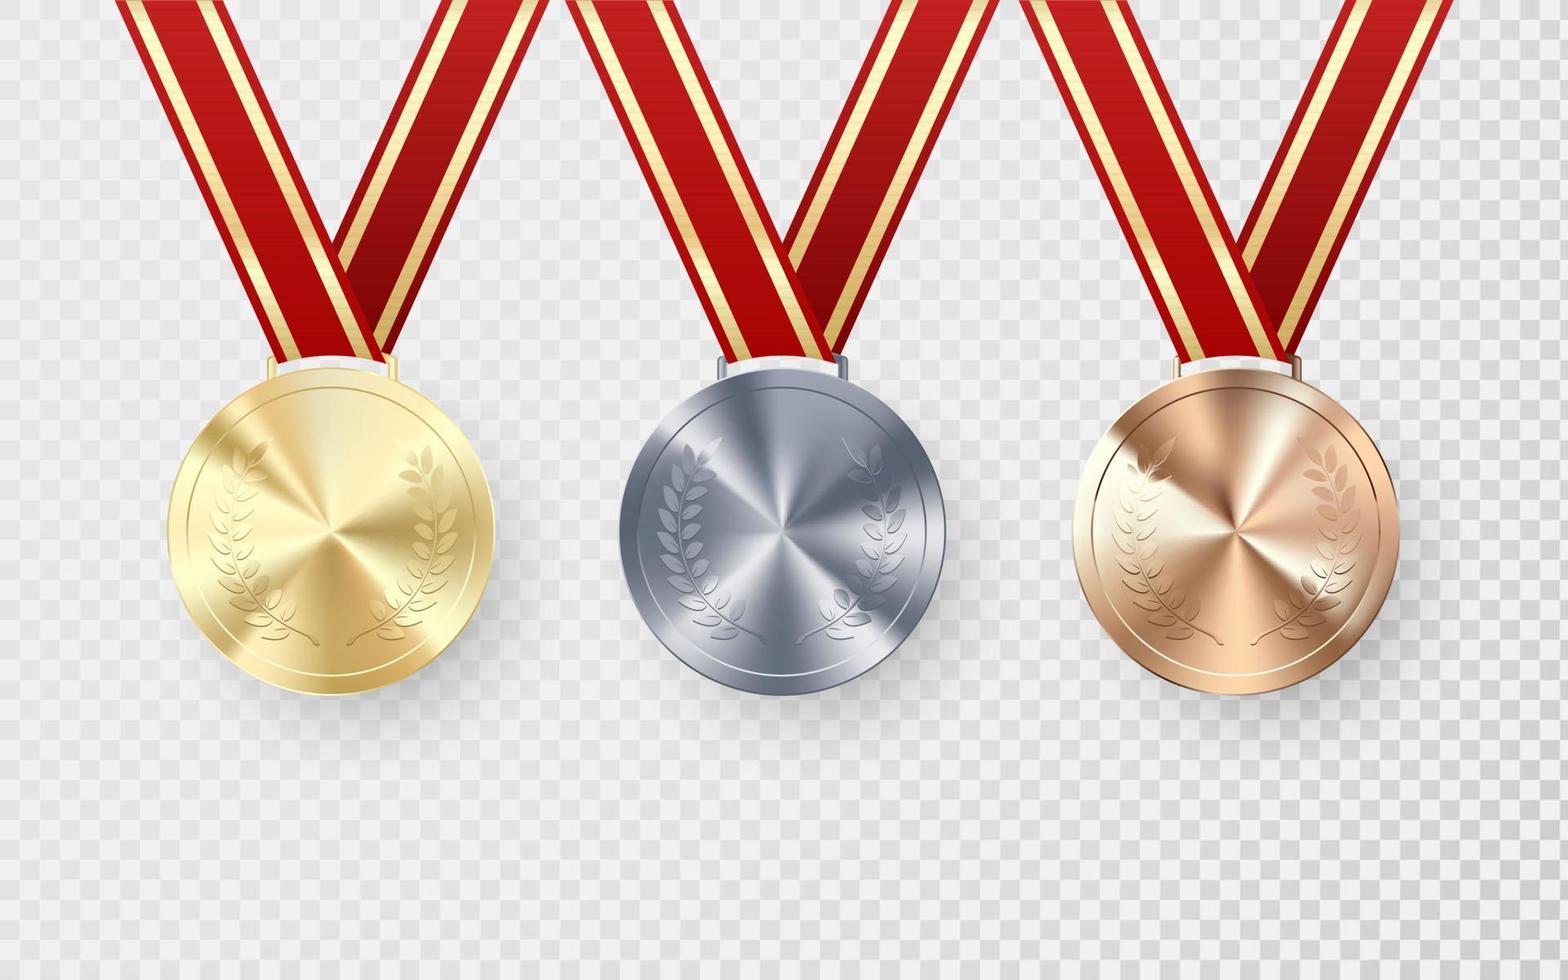 Golden Silver and Bronze medals with laurel hanging on red ribbon. Award symbol of victory and success. Vector illustration